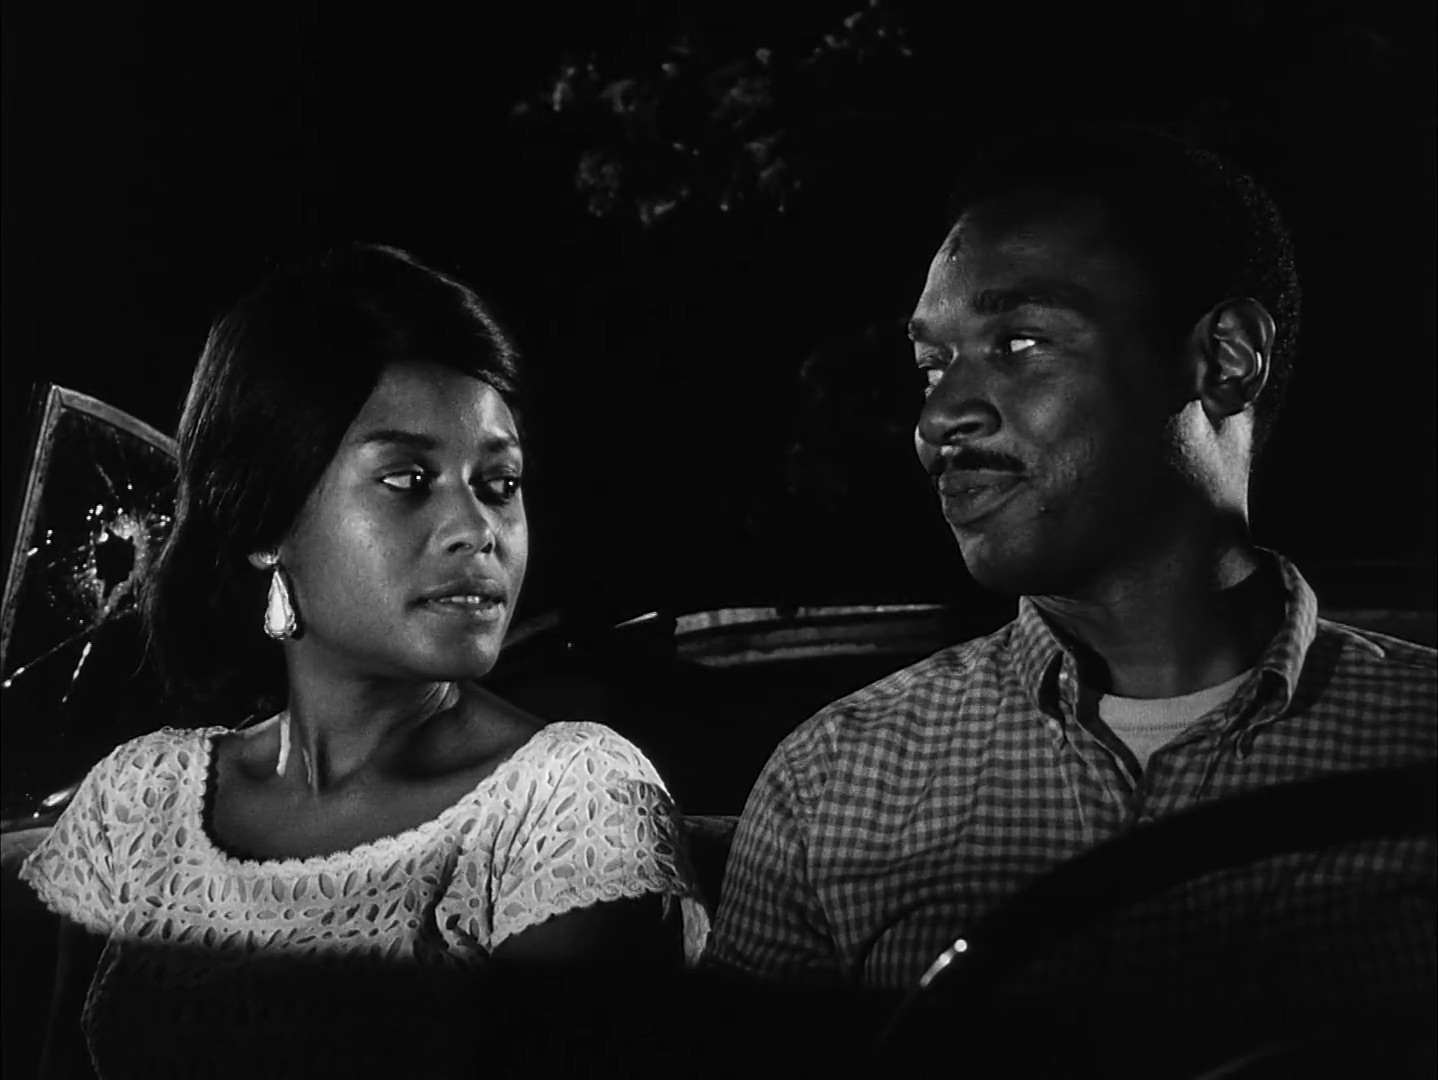 (4) Nothing but a Man (Michael Roemer, 1964)